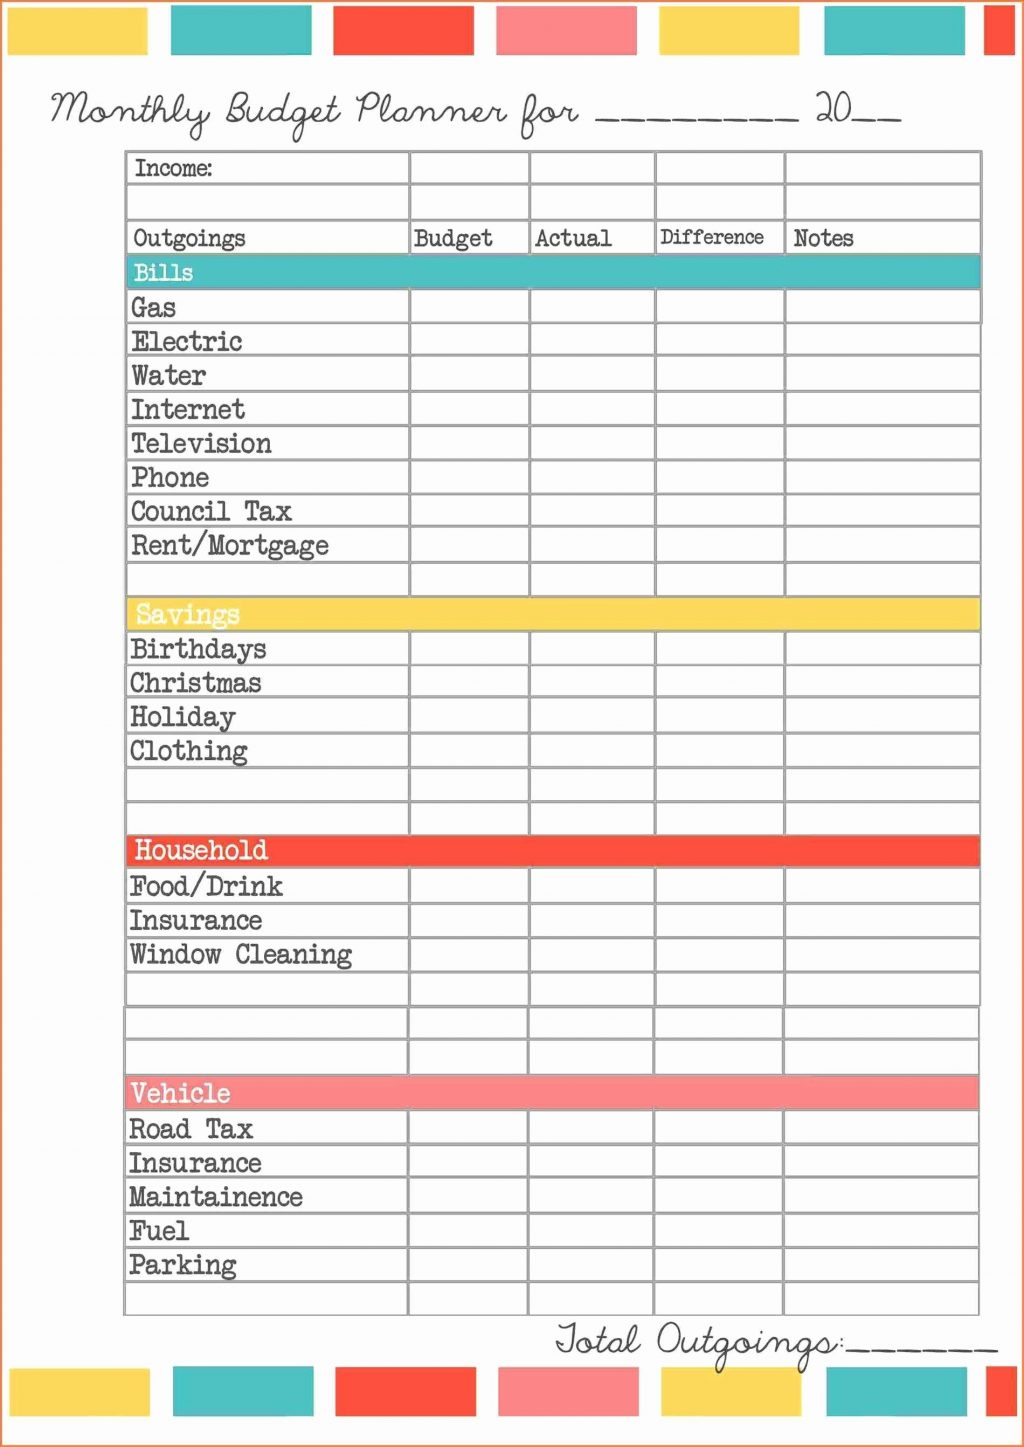 Accounting Spreadsheet Templates For Small Business Free Downloads For Accounting Spreadsheet Template For Small Business